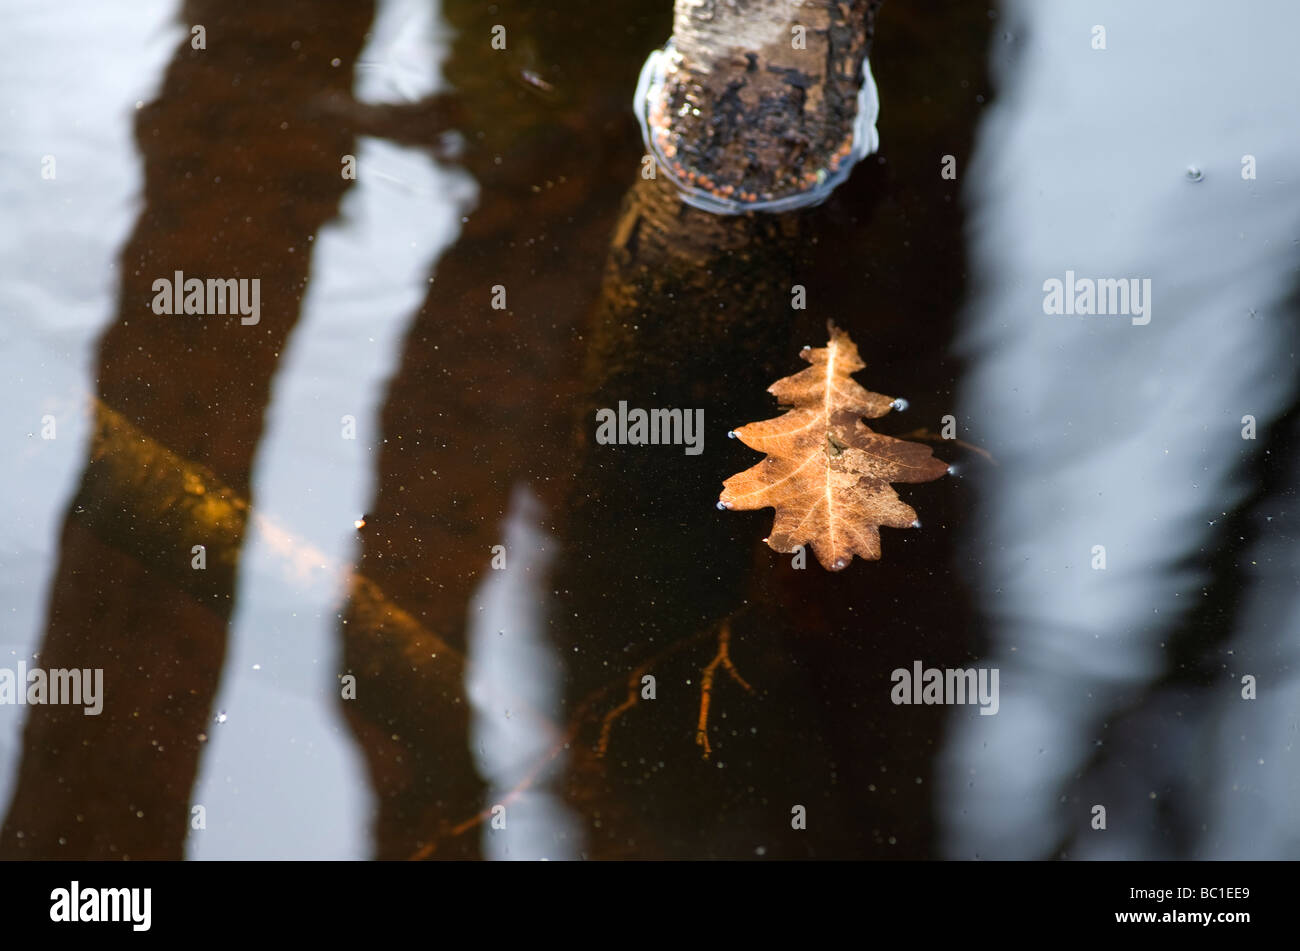 artistic view of shapes in nature Stock Photo